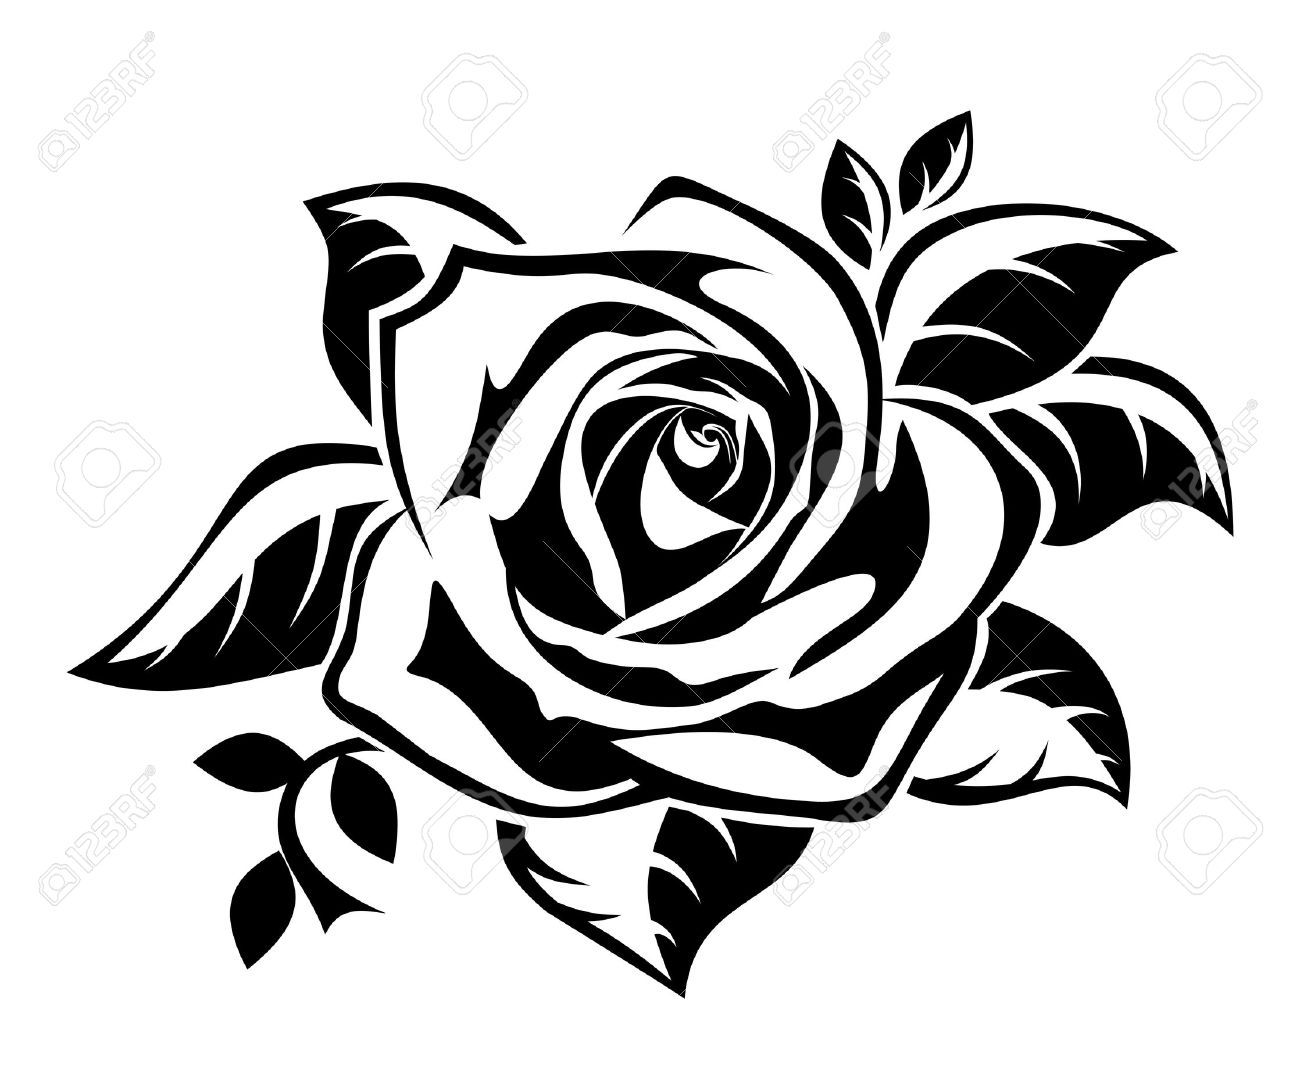 Rose Cliparts, Stock Vector And Royalty Free Rose